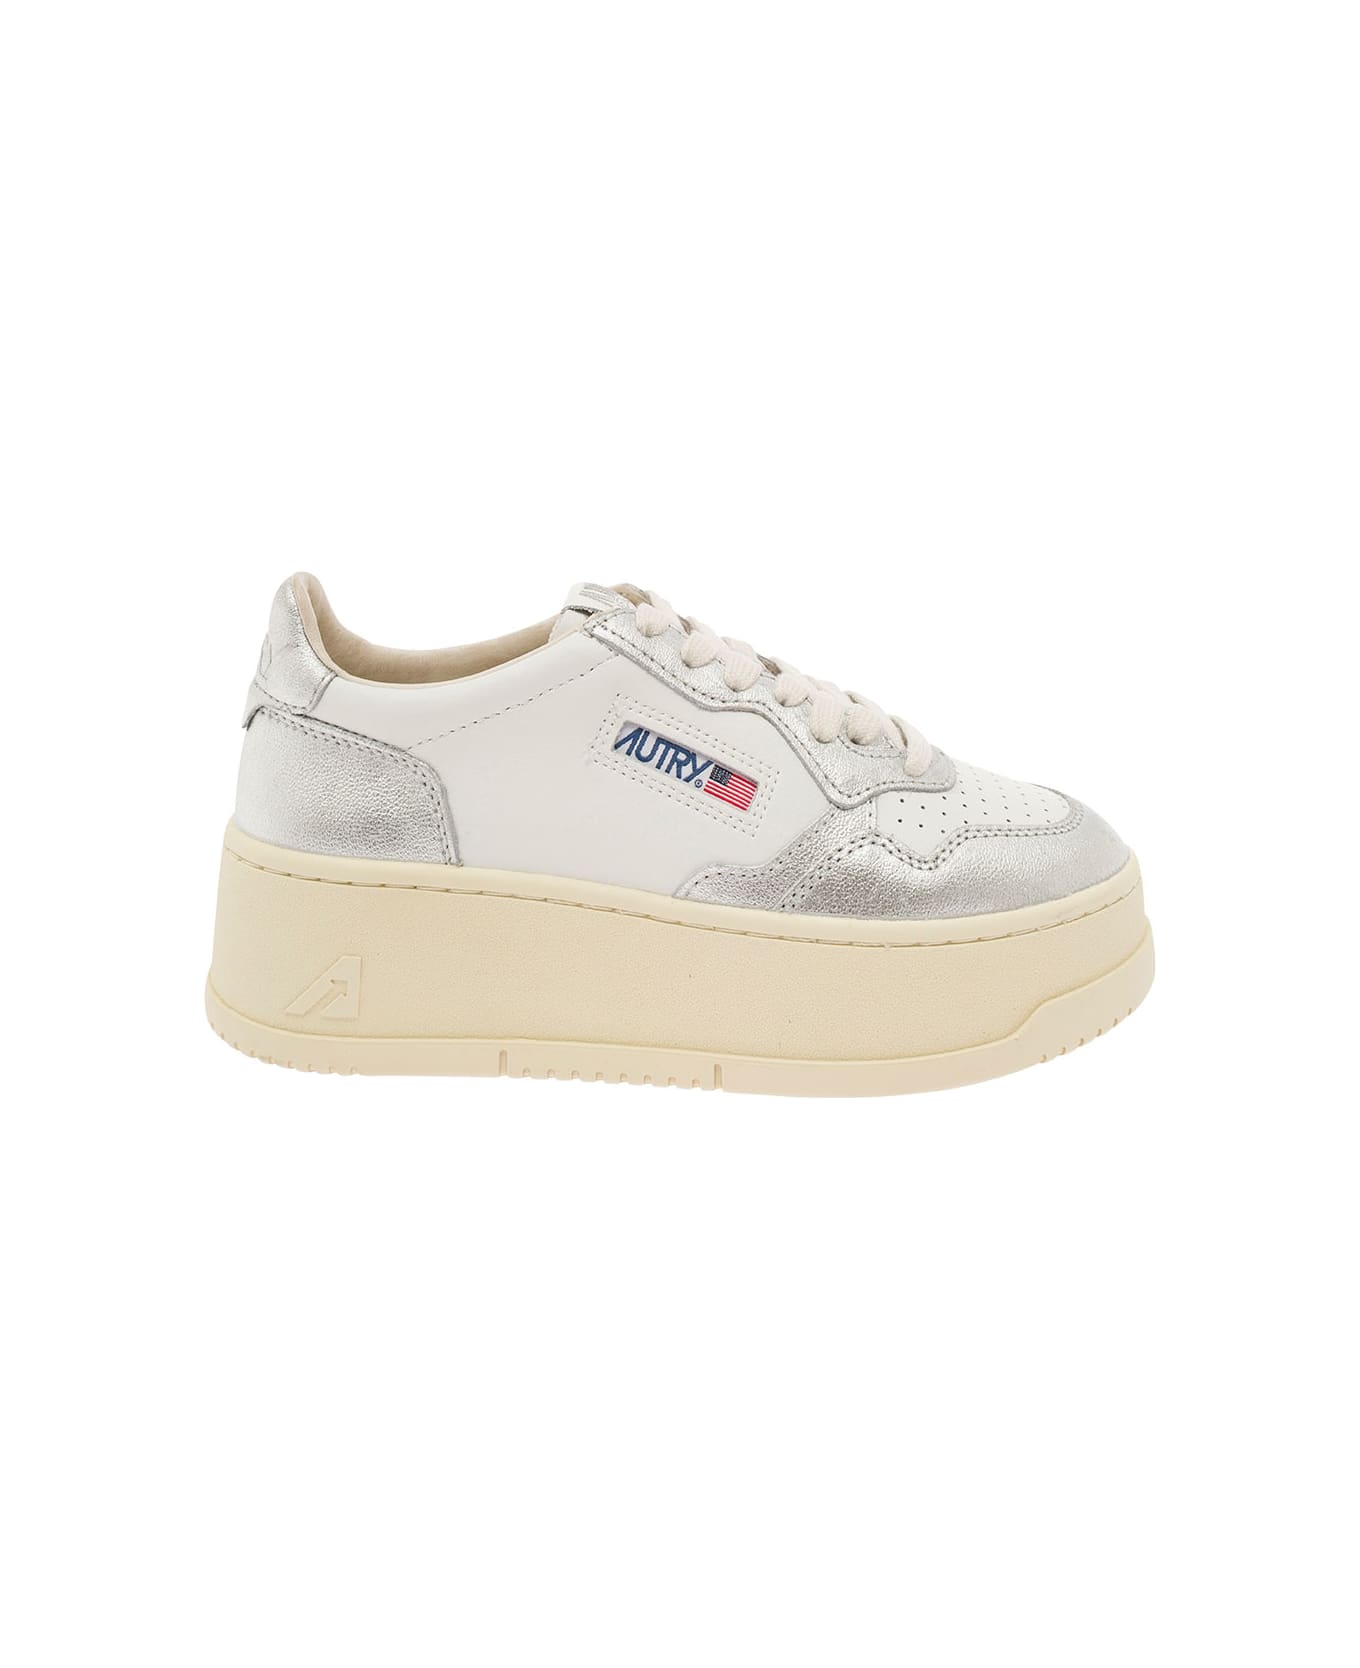 Autry White And Silver Low Top Platform Sneakers With Logo In Leather Woman - White ウェッジシューズ